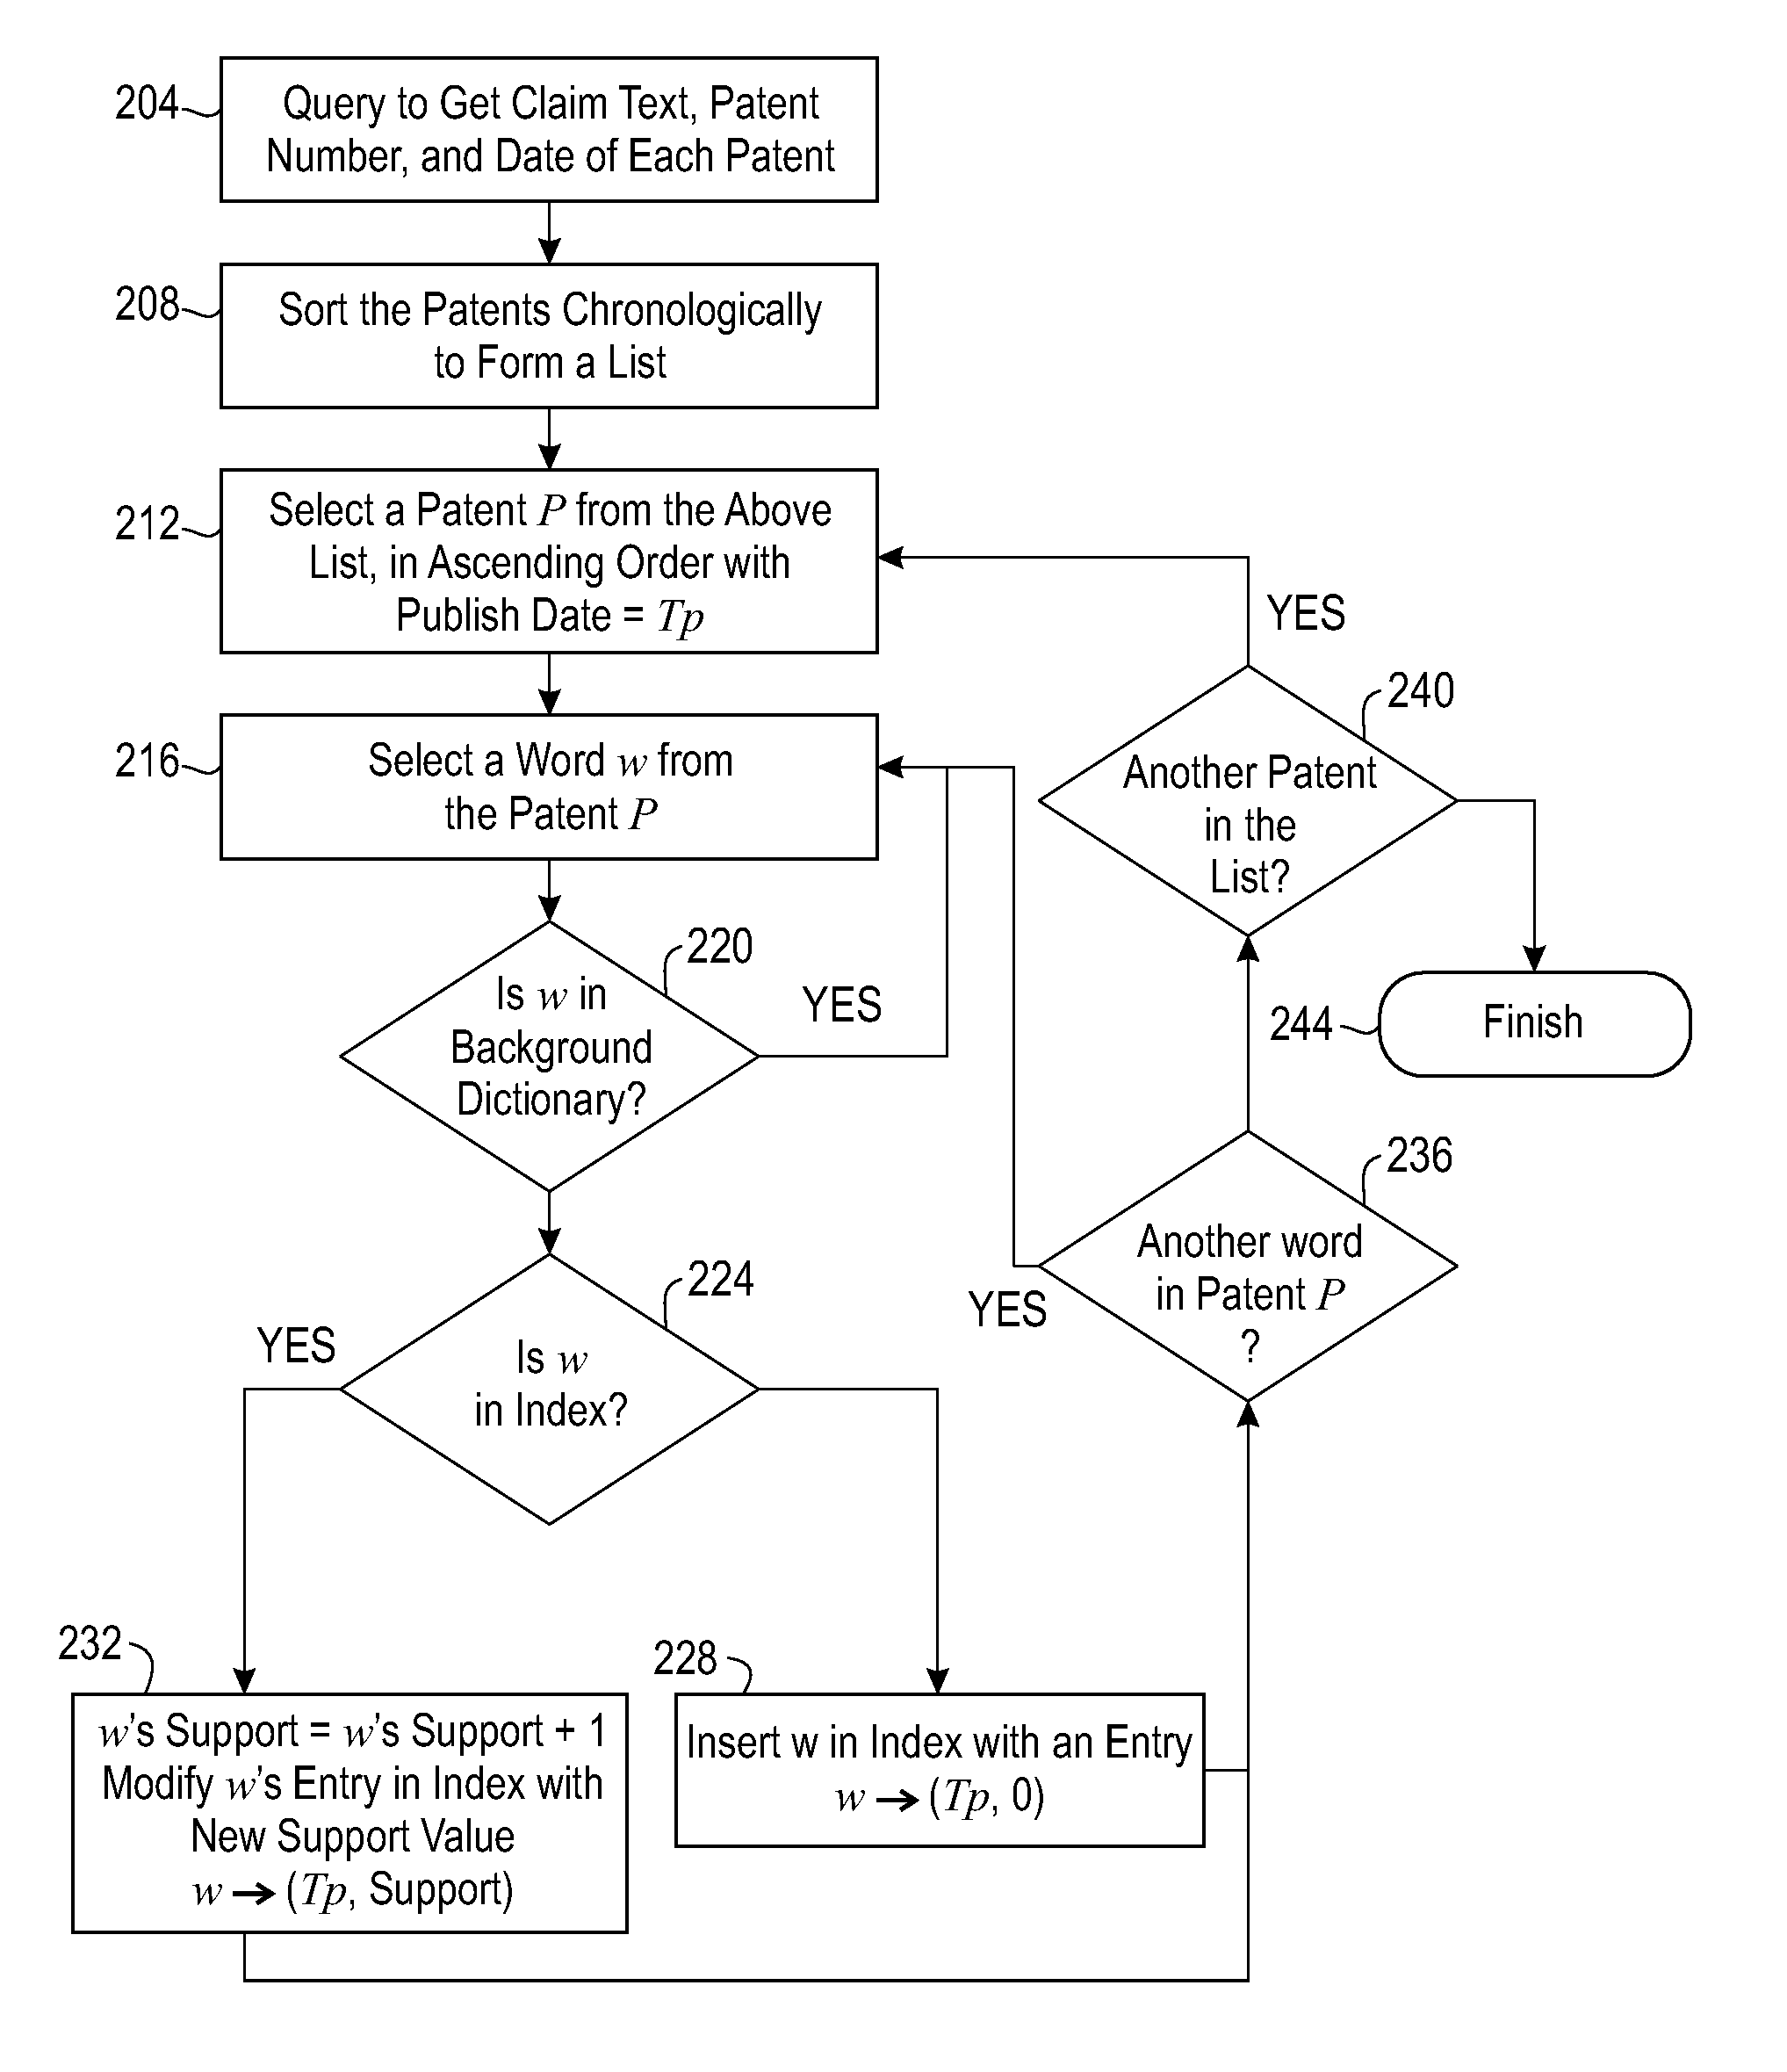 Method for Analyzing Patent Claims